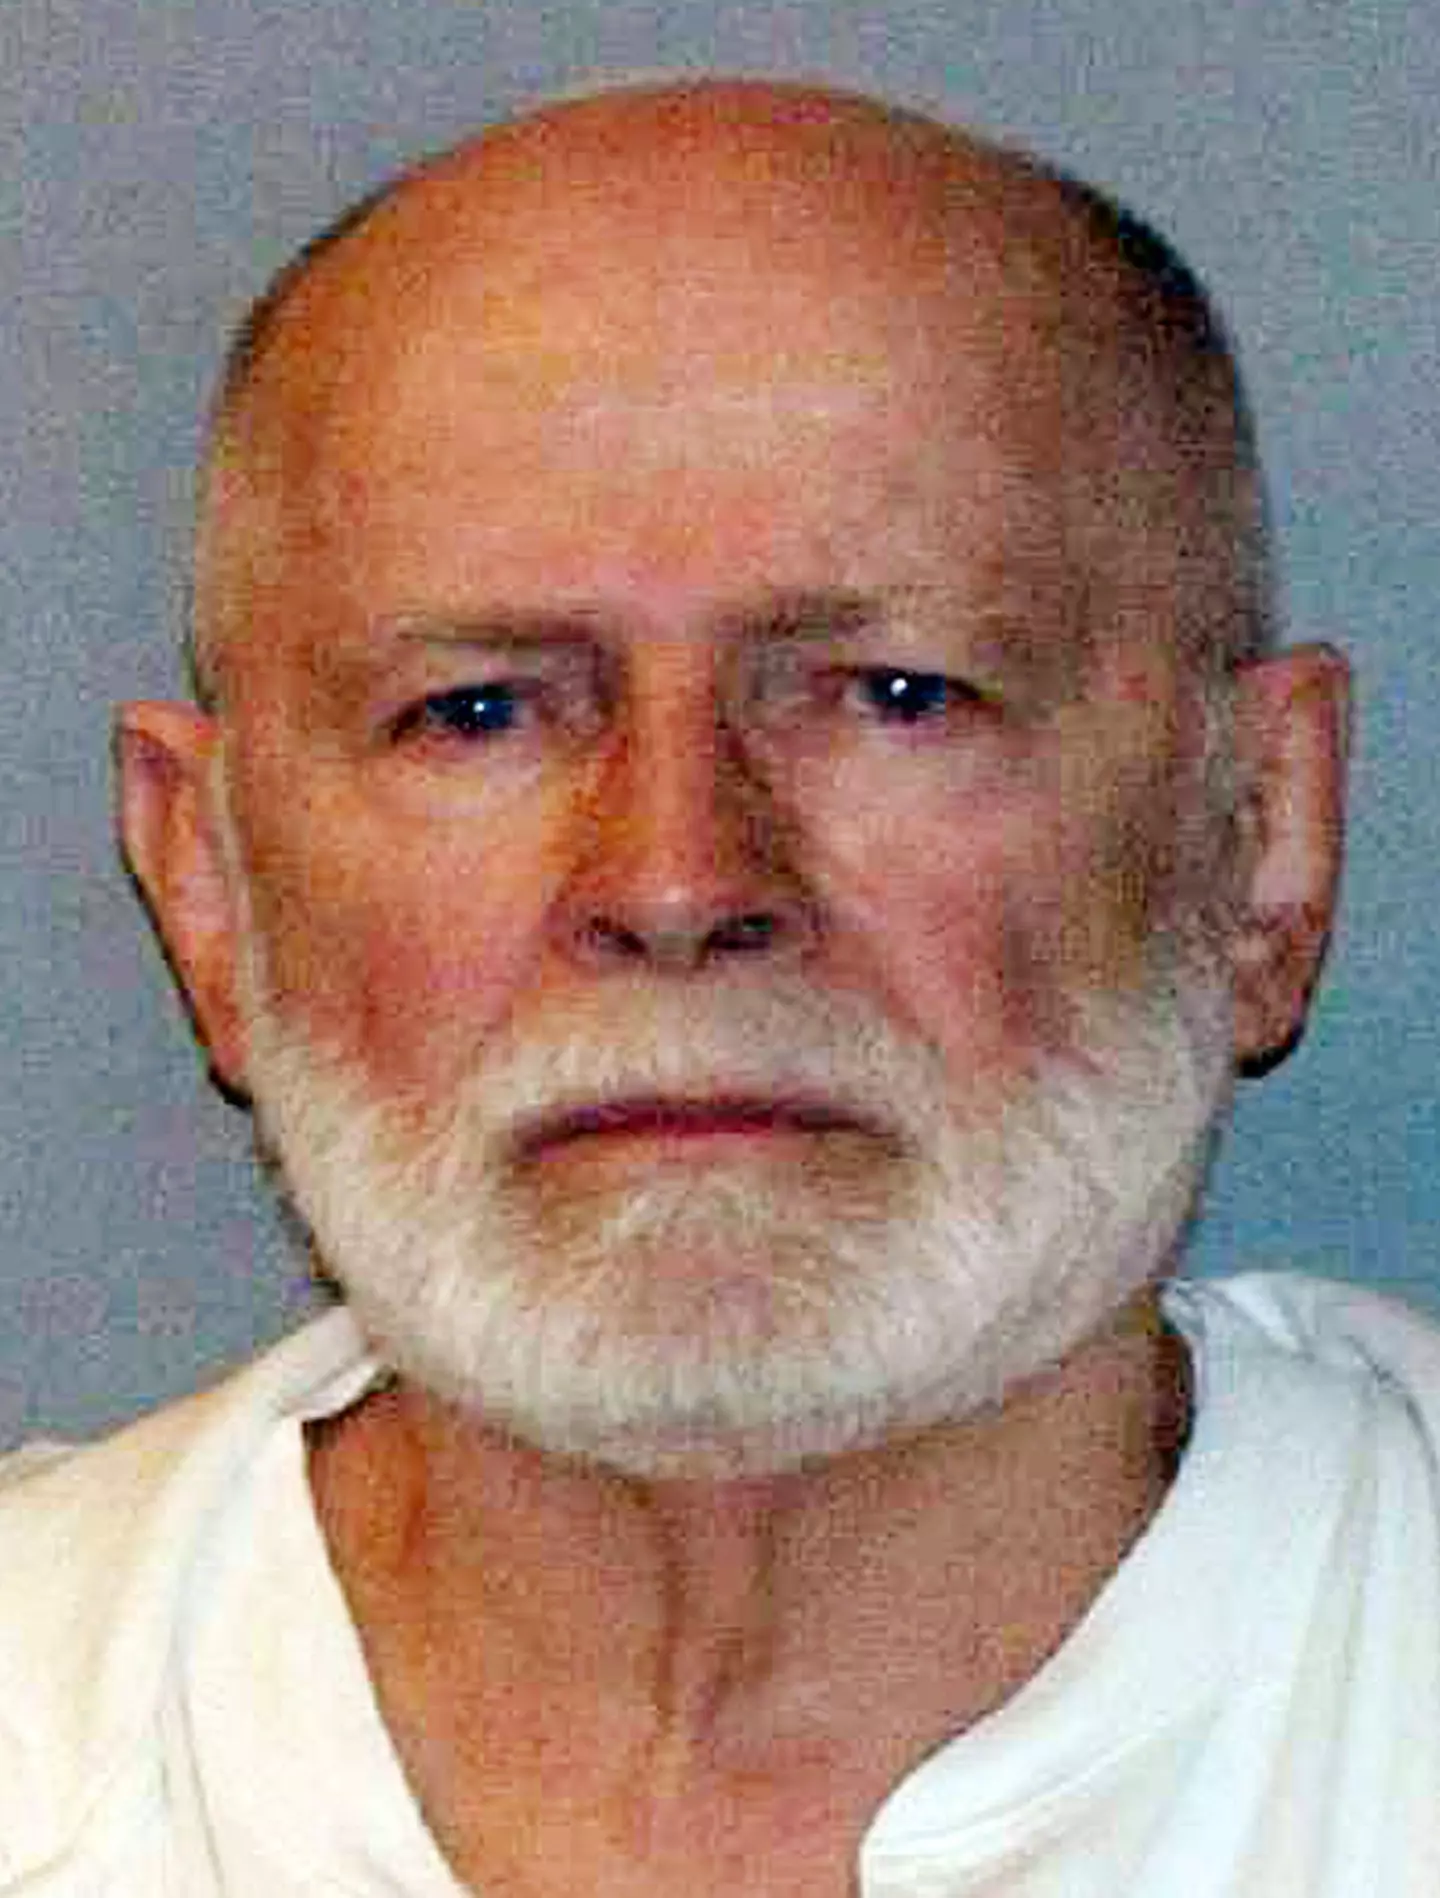 James 'Whitey' Bulger was killed in his cell in 2018.